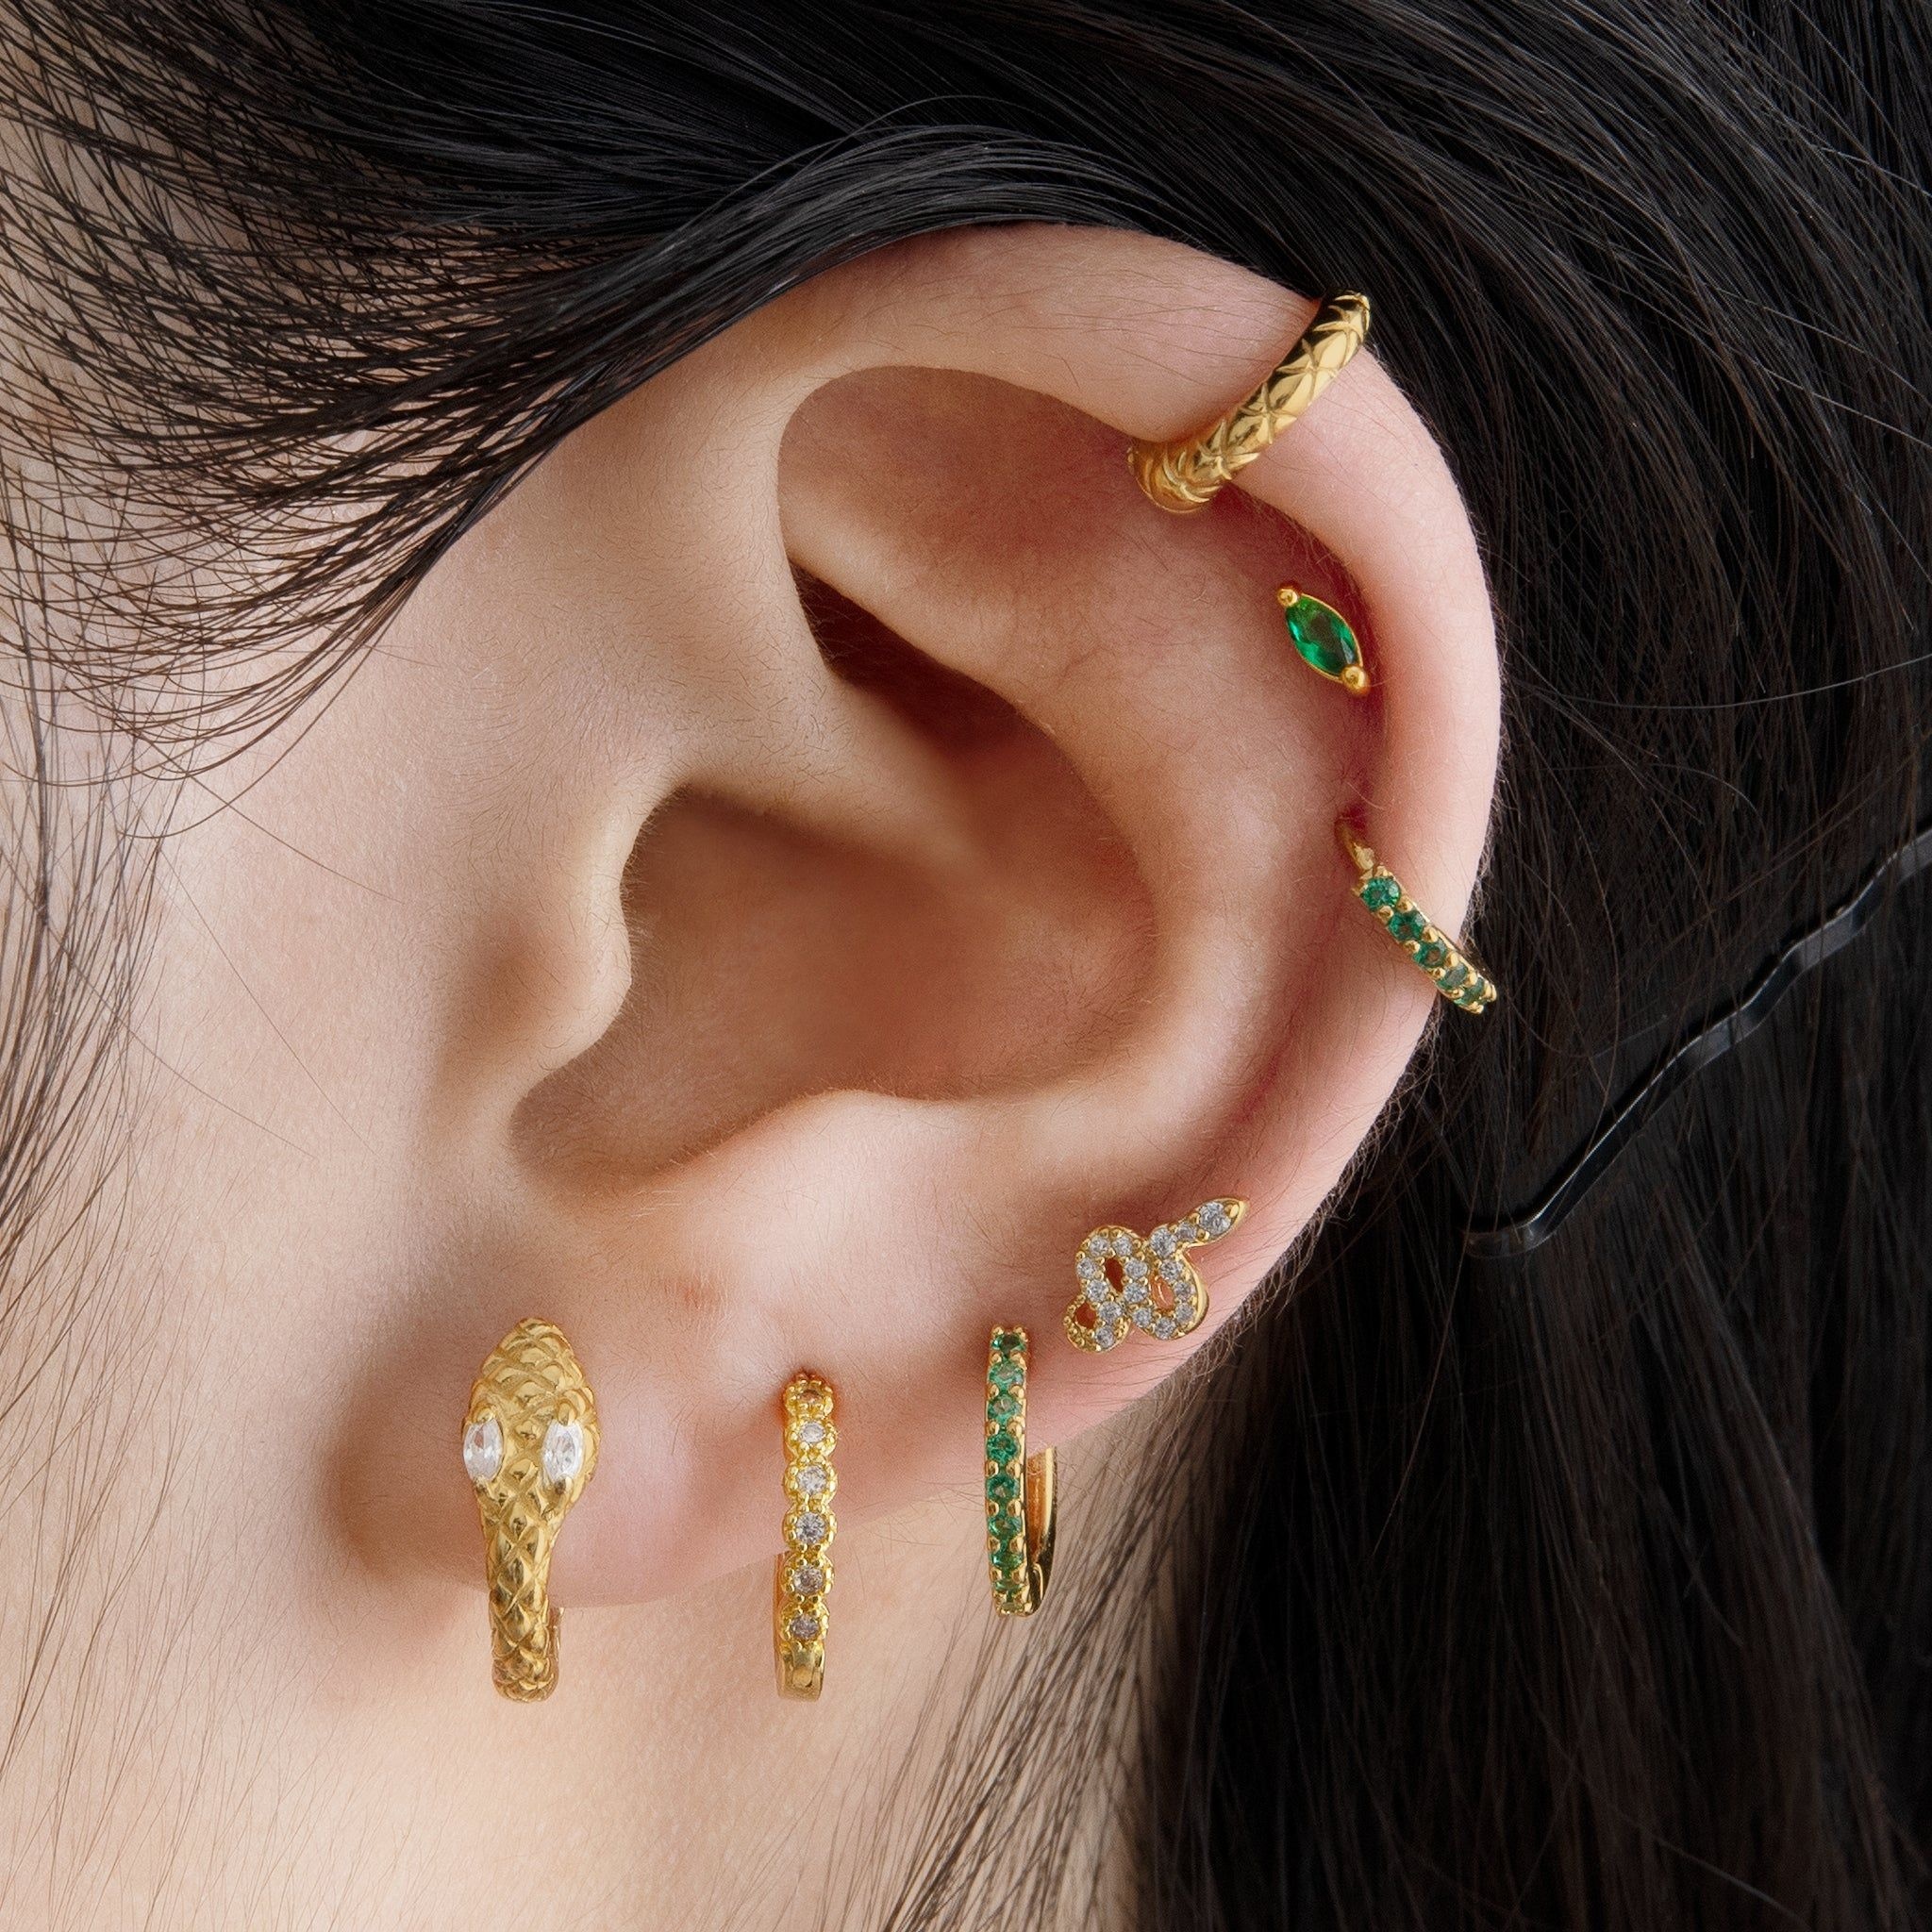 Serpent bite huggie earrings, Helix piercing, Bold and daring, Edgy and cool, 2050x2050 HD Phone